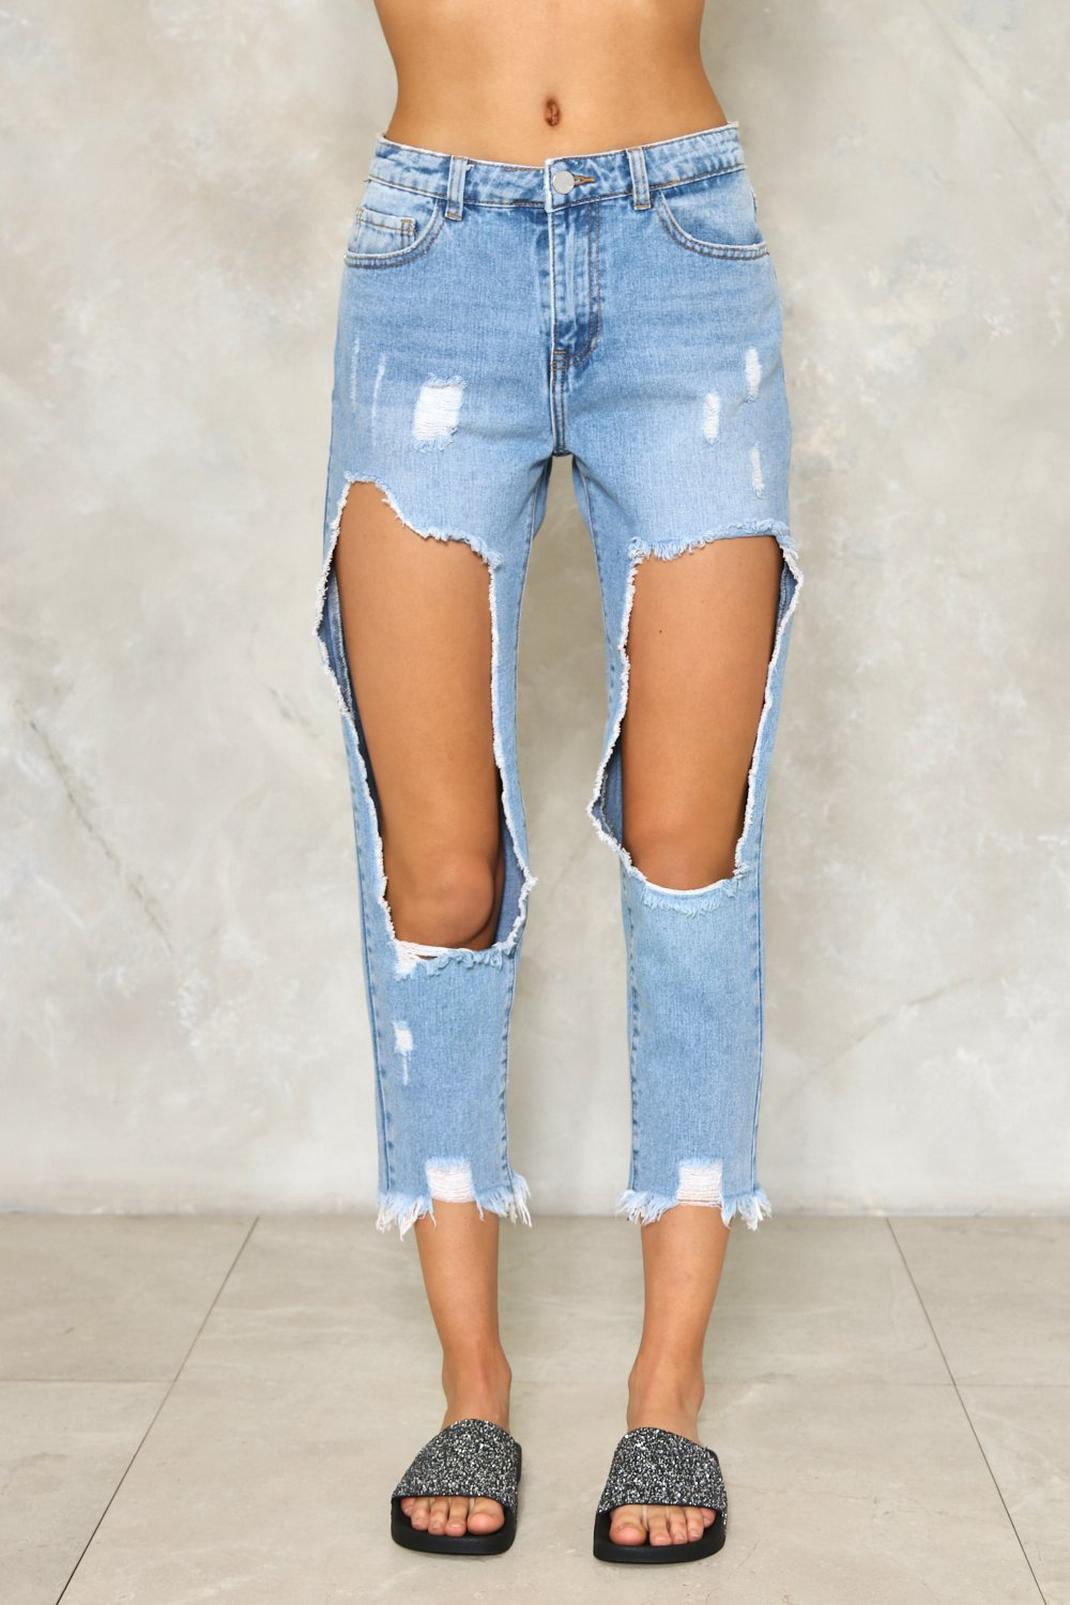 Rip Her to Shreds Distressed Jeans | Nasty Gal